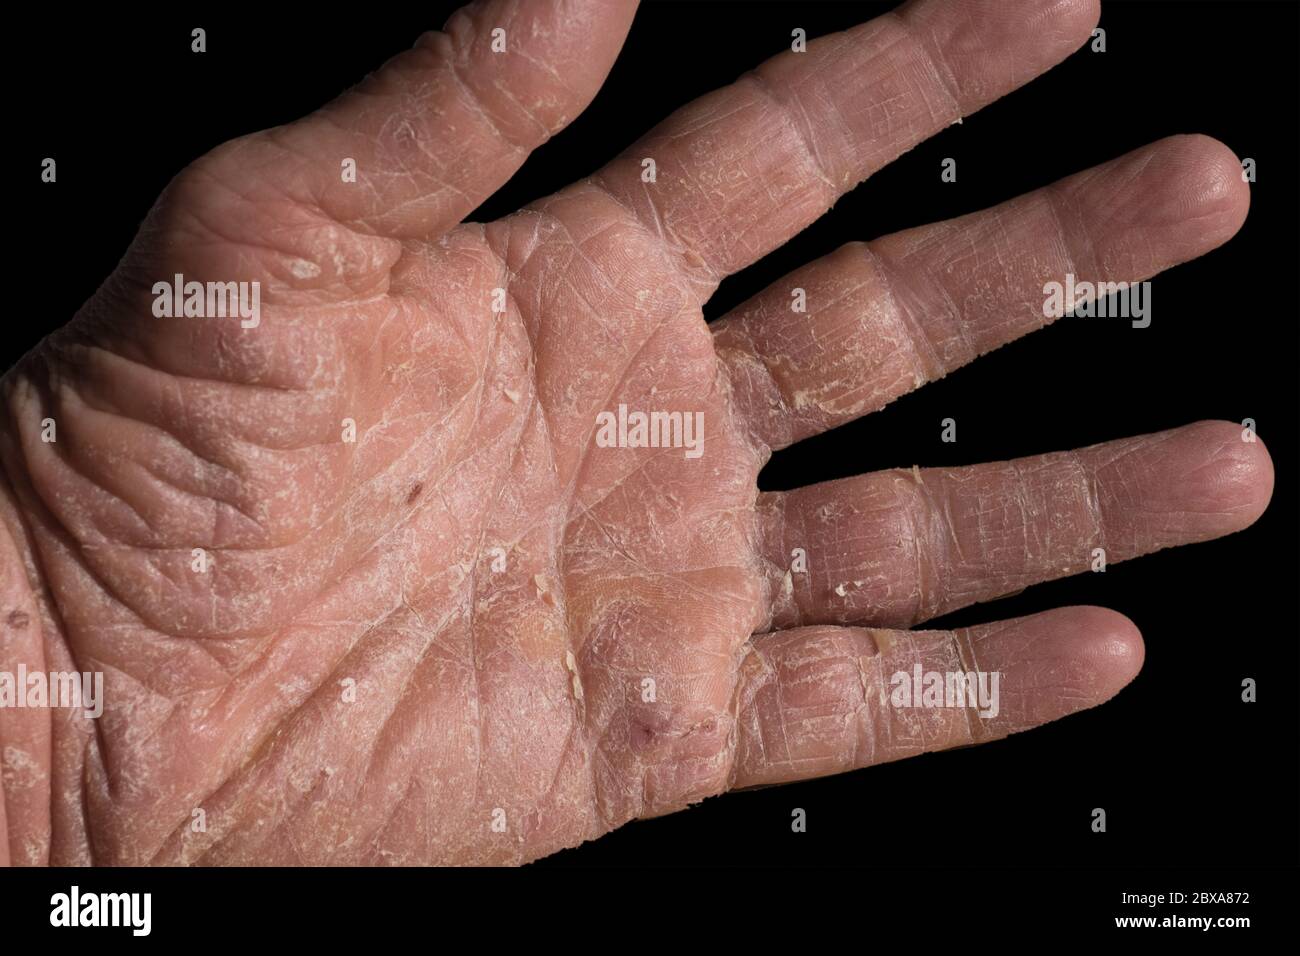 Eczema with redness, swellings, bumps and flakes on the hand and fingers of a man. Isolated on black Stock Photo